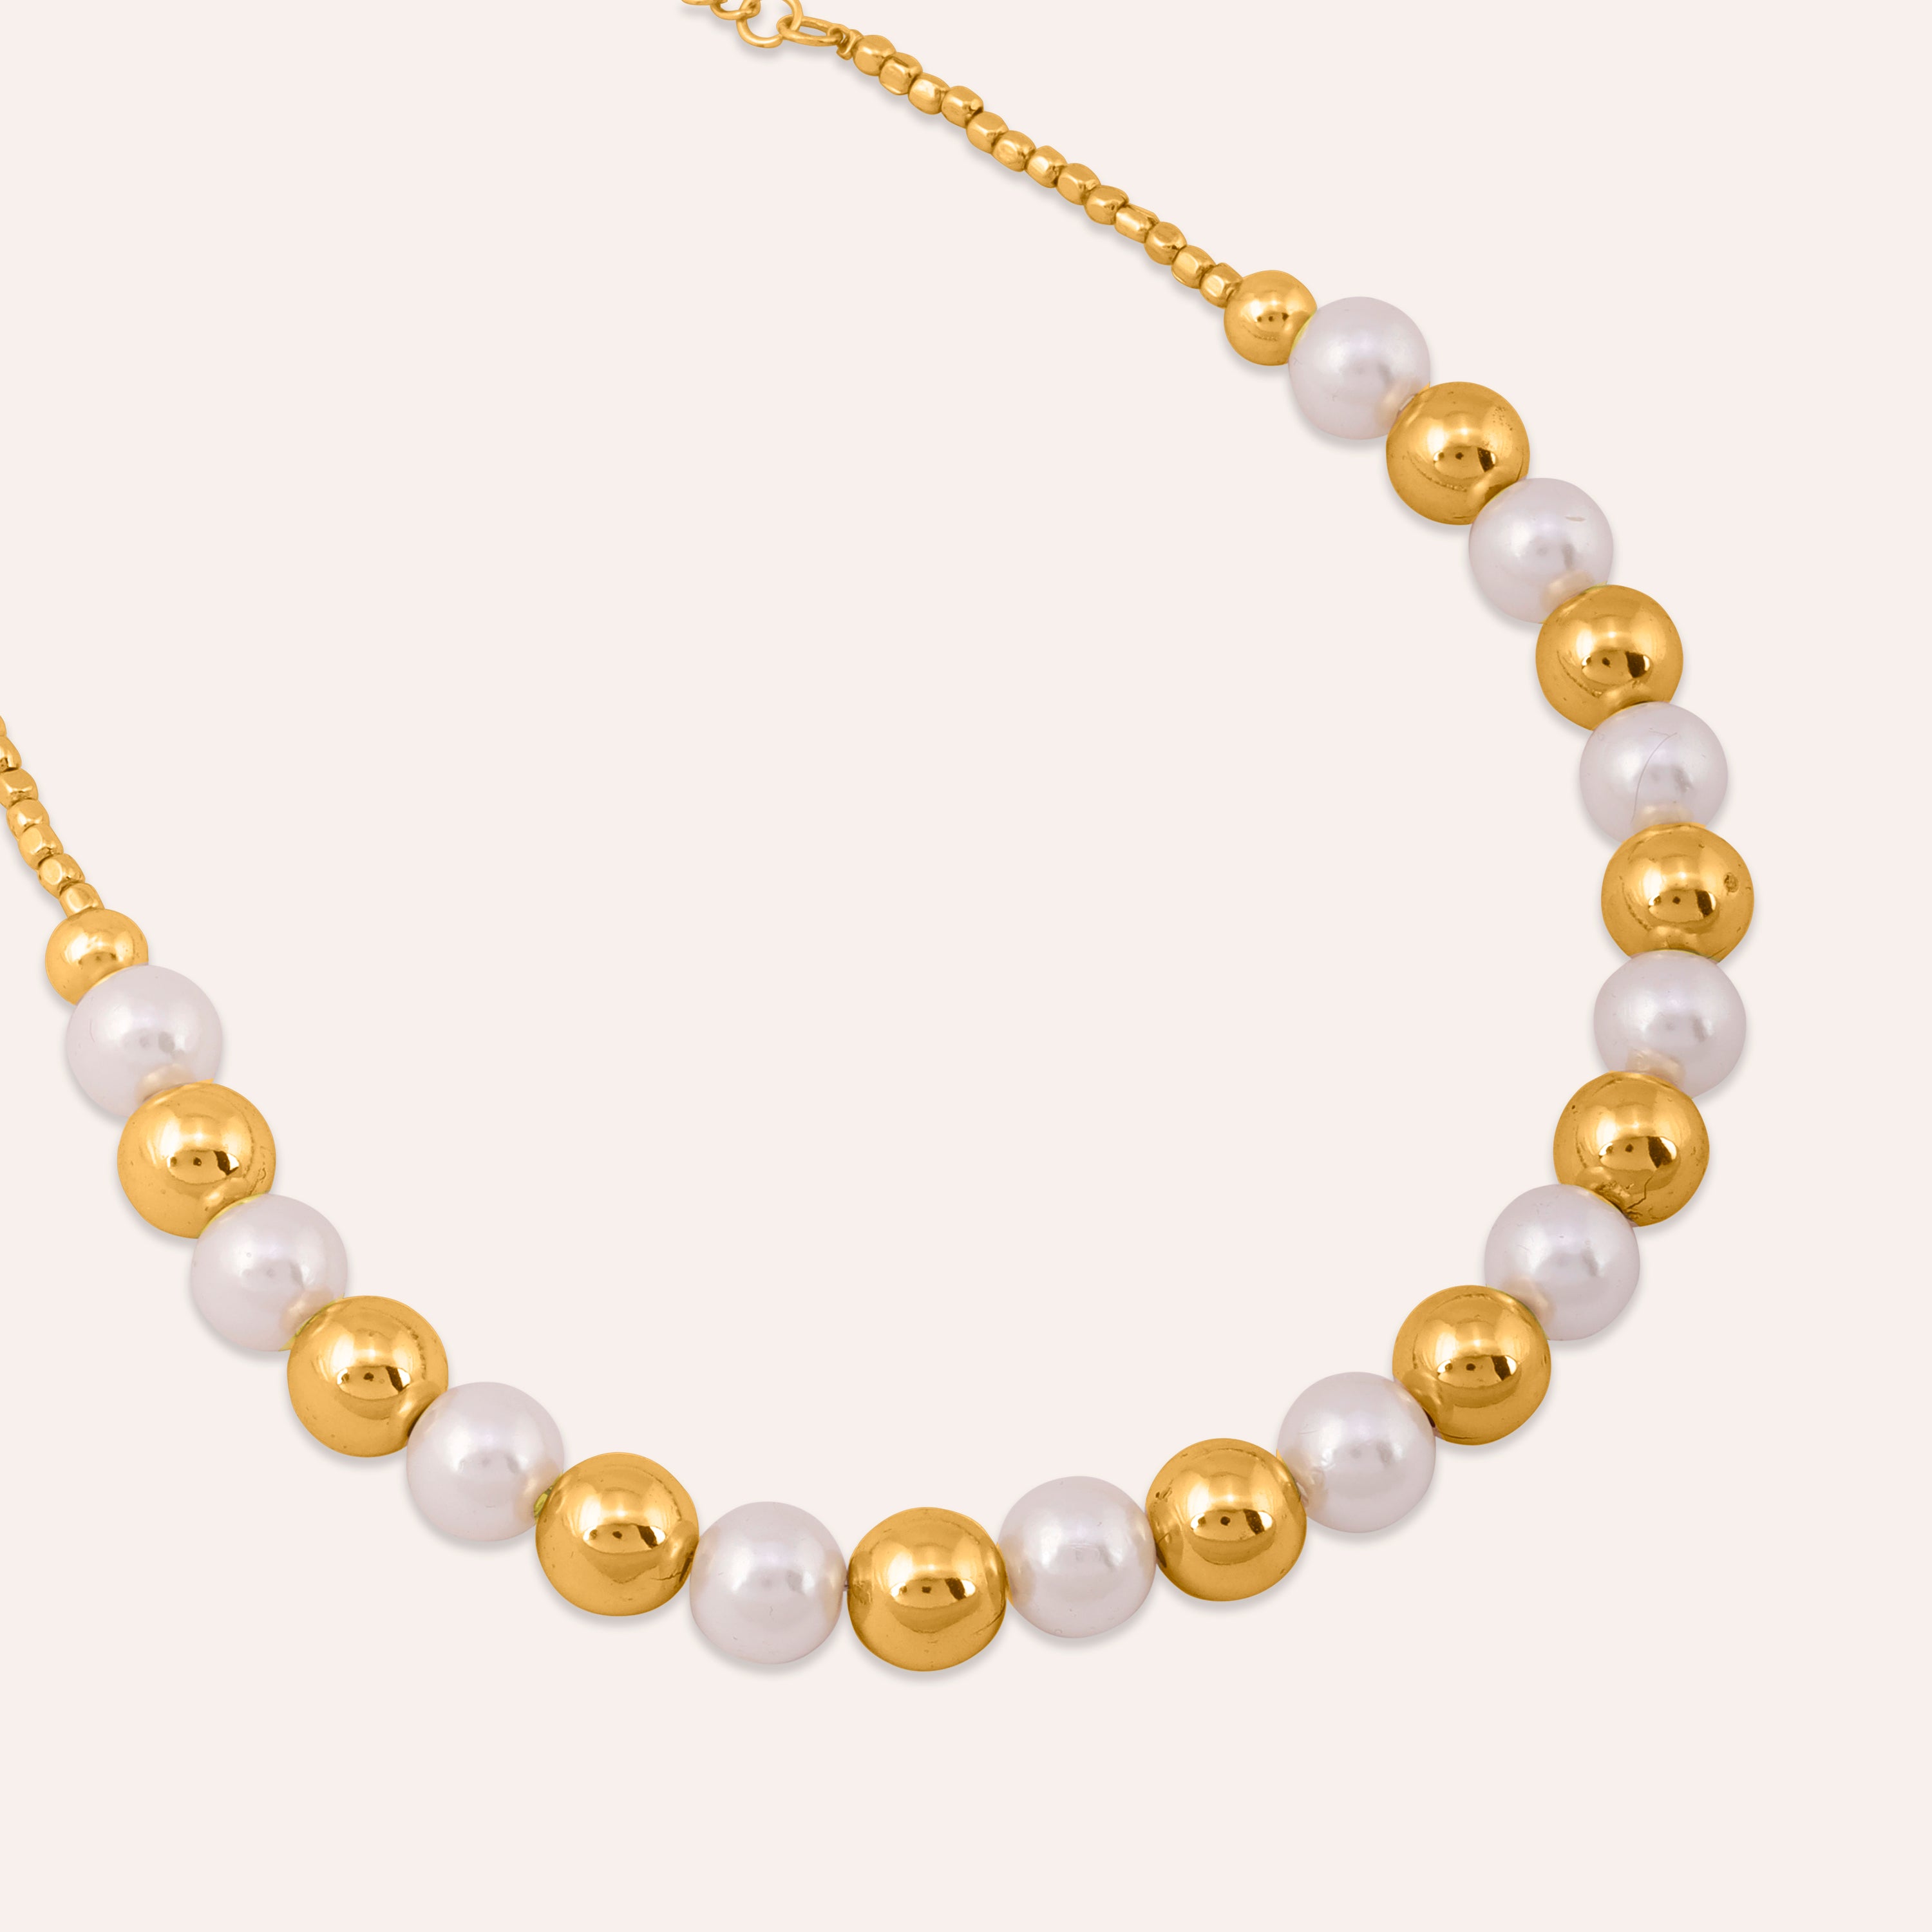 7mm White Pearl and Gold Necklace – Gump's